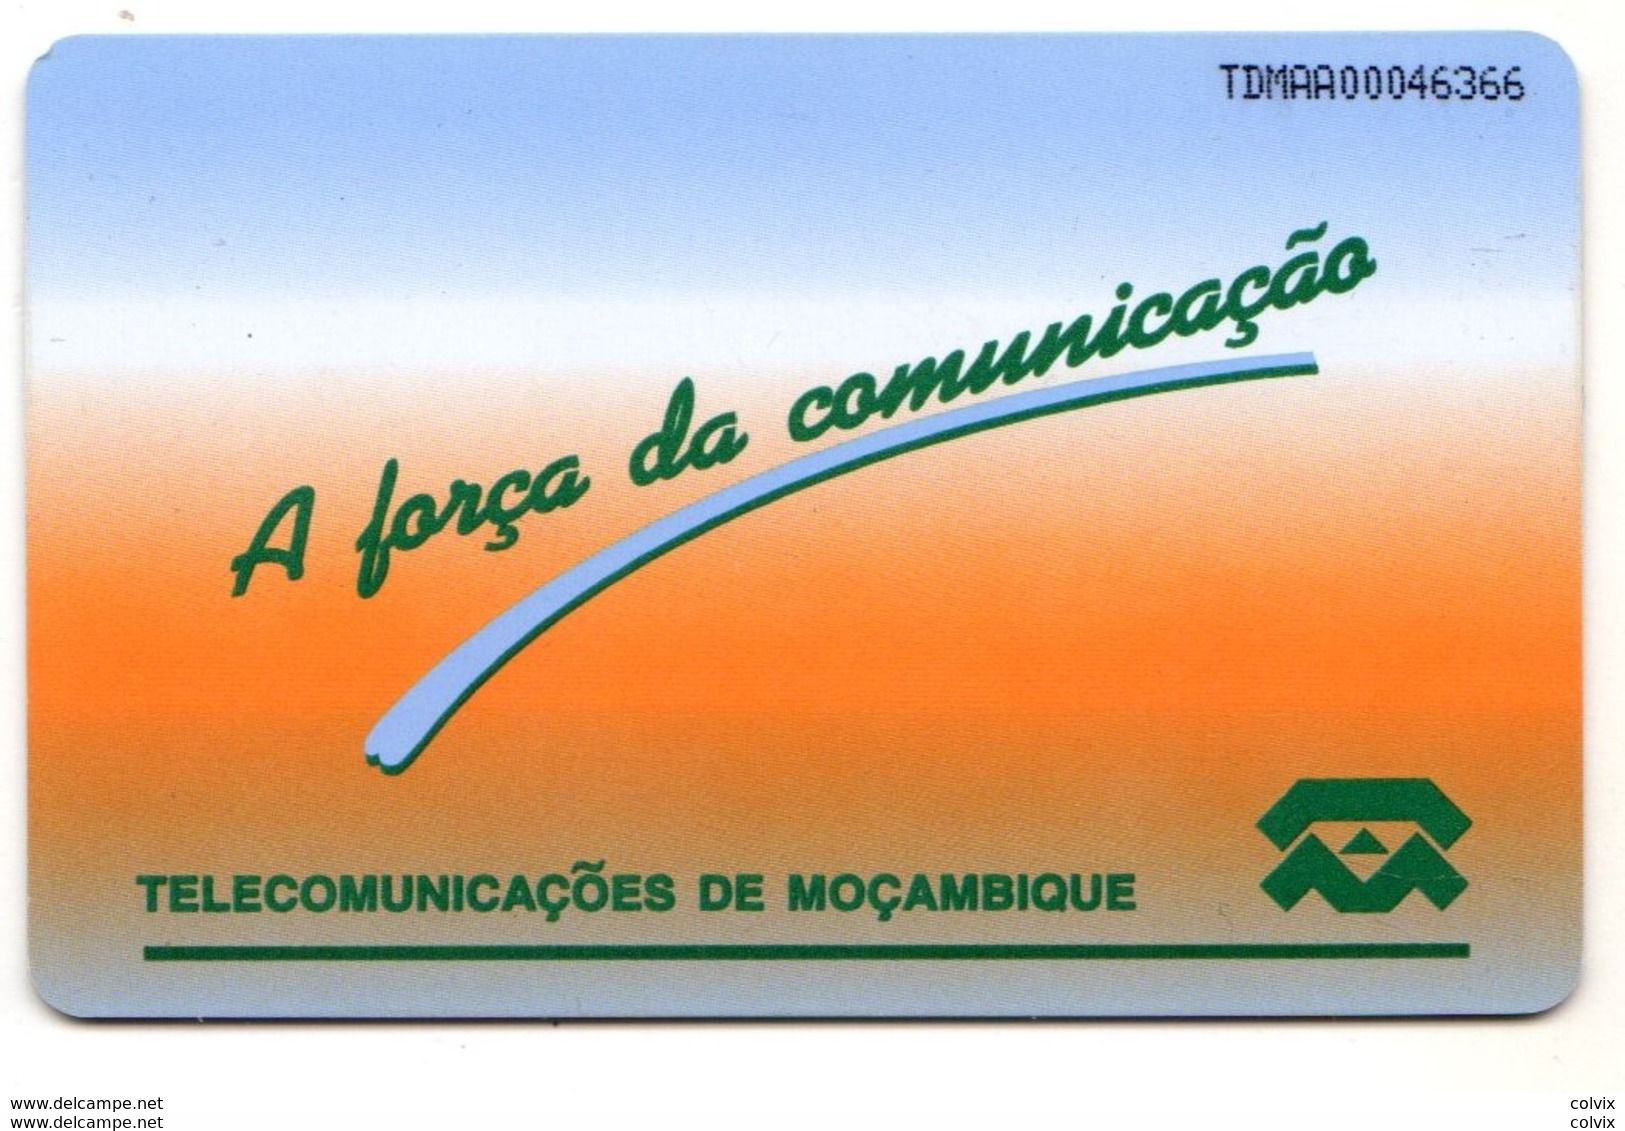 MOZAMBIQUE REF MV CARDS MZB-01 50 000MT1997 Instructions Of Use 1 - Mozambico